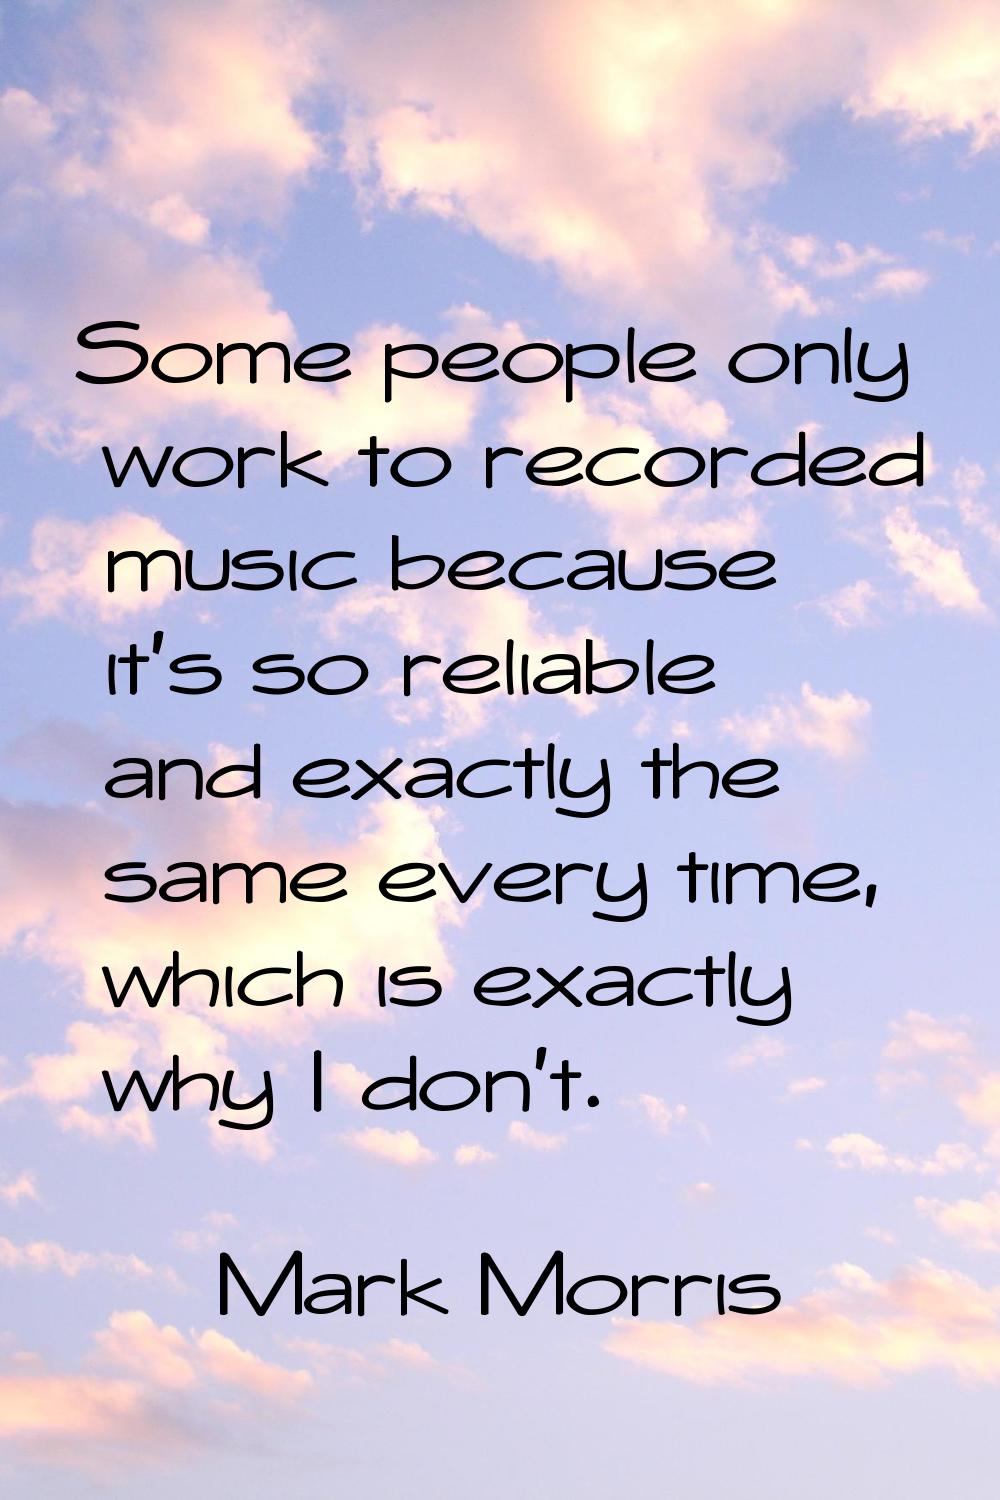 Some people only work to recorded music because it's so reliable and exactly the same every time, w